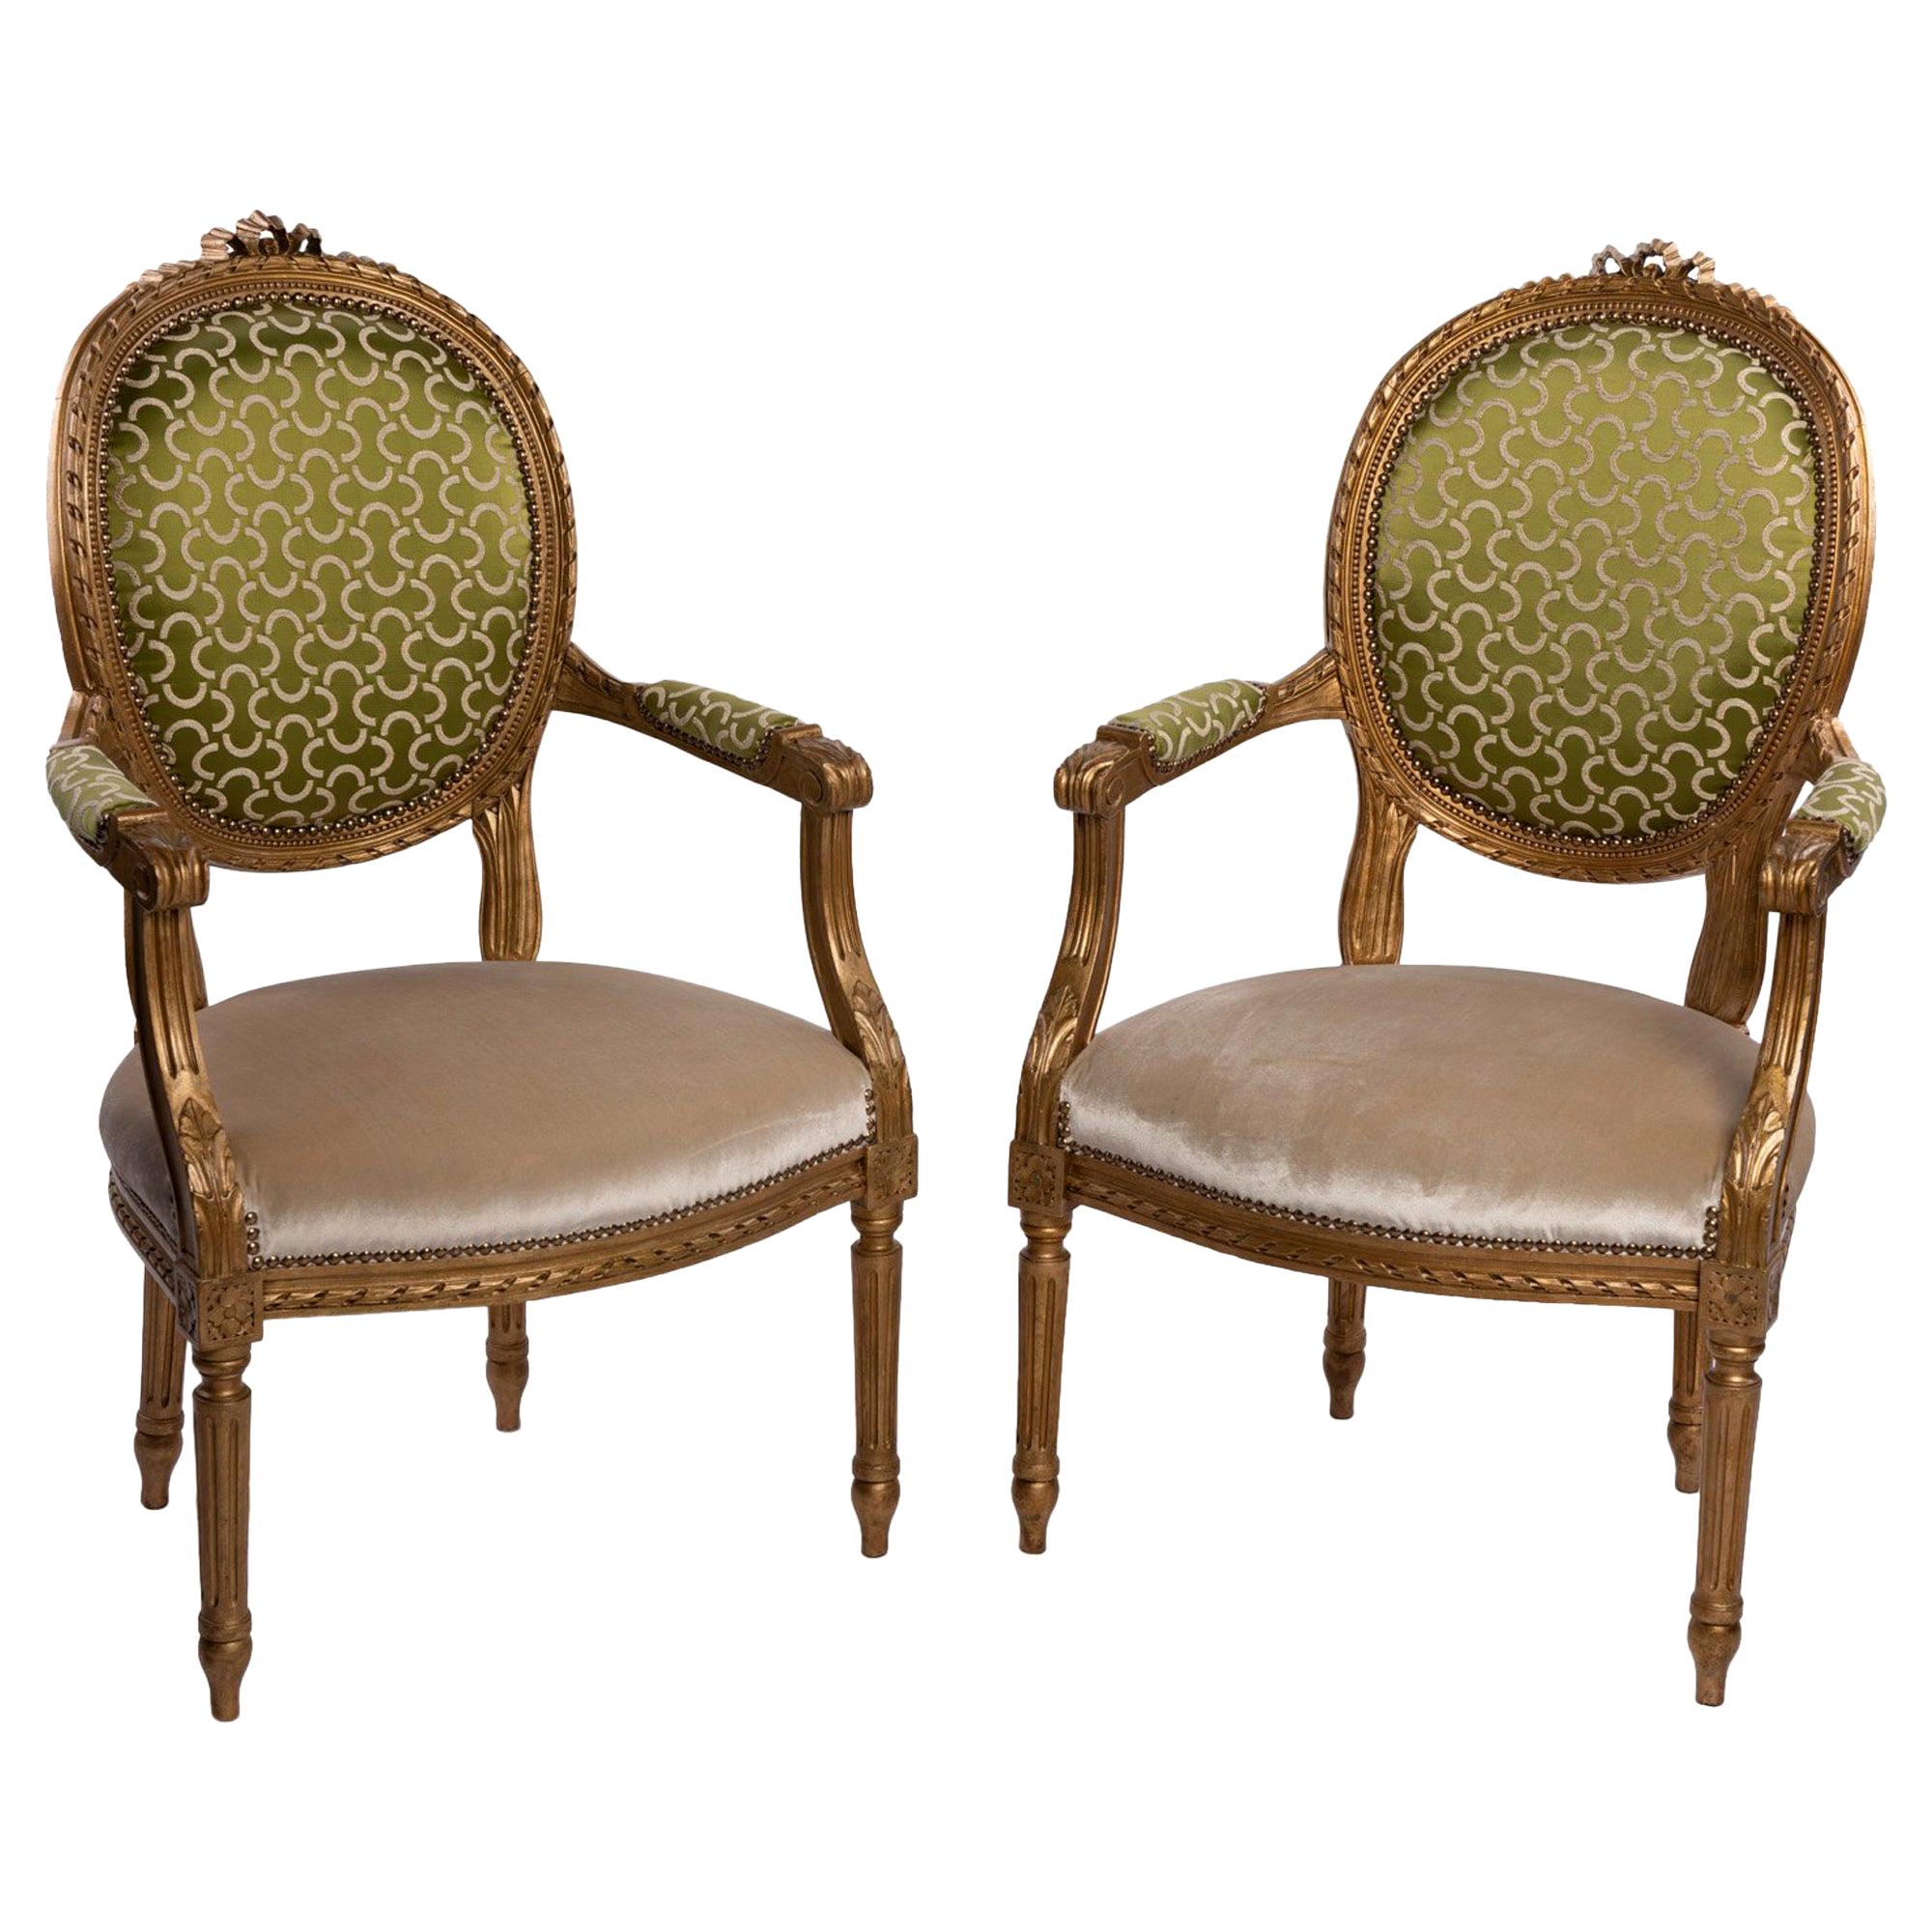  Louis XVI Style French Golden Wood Armchairs 